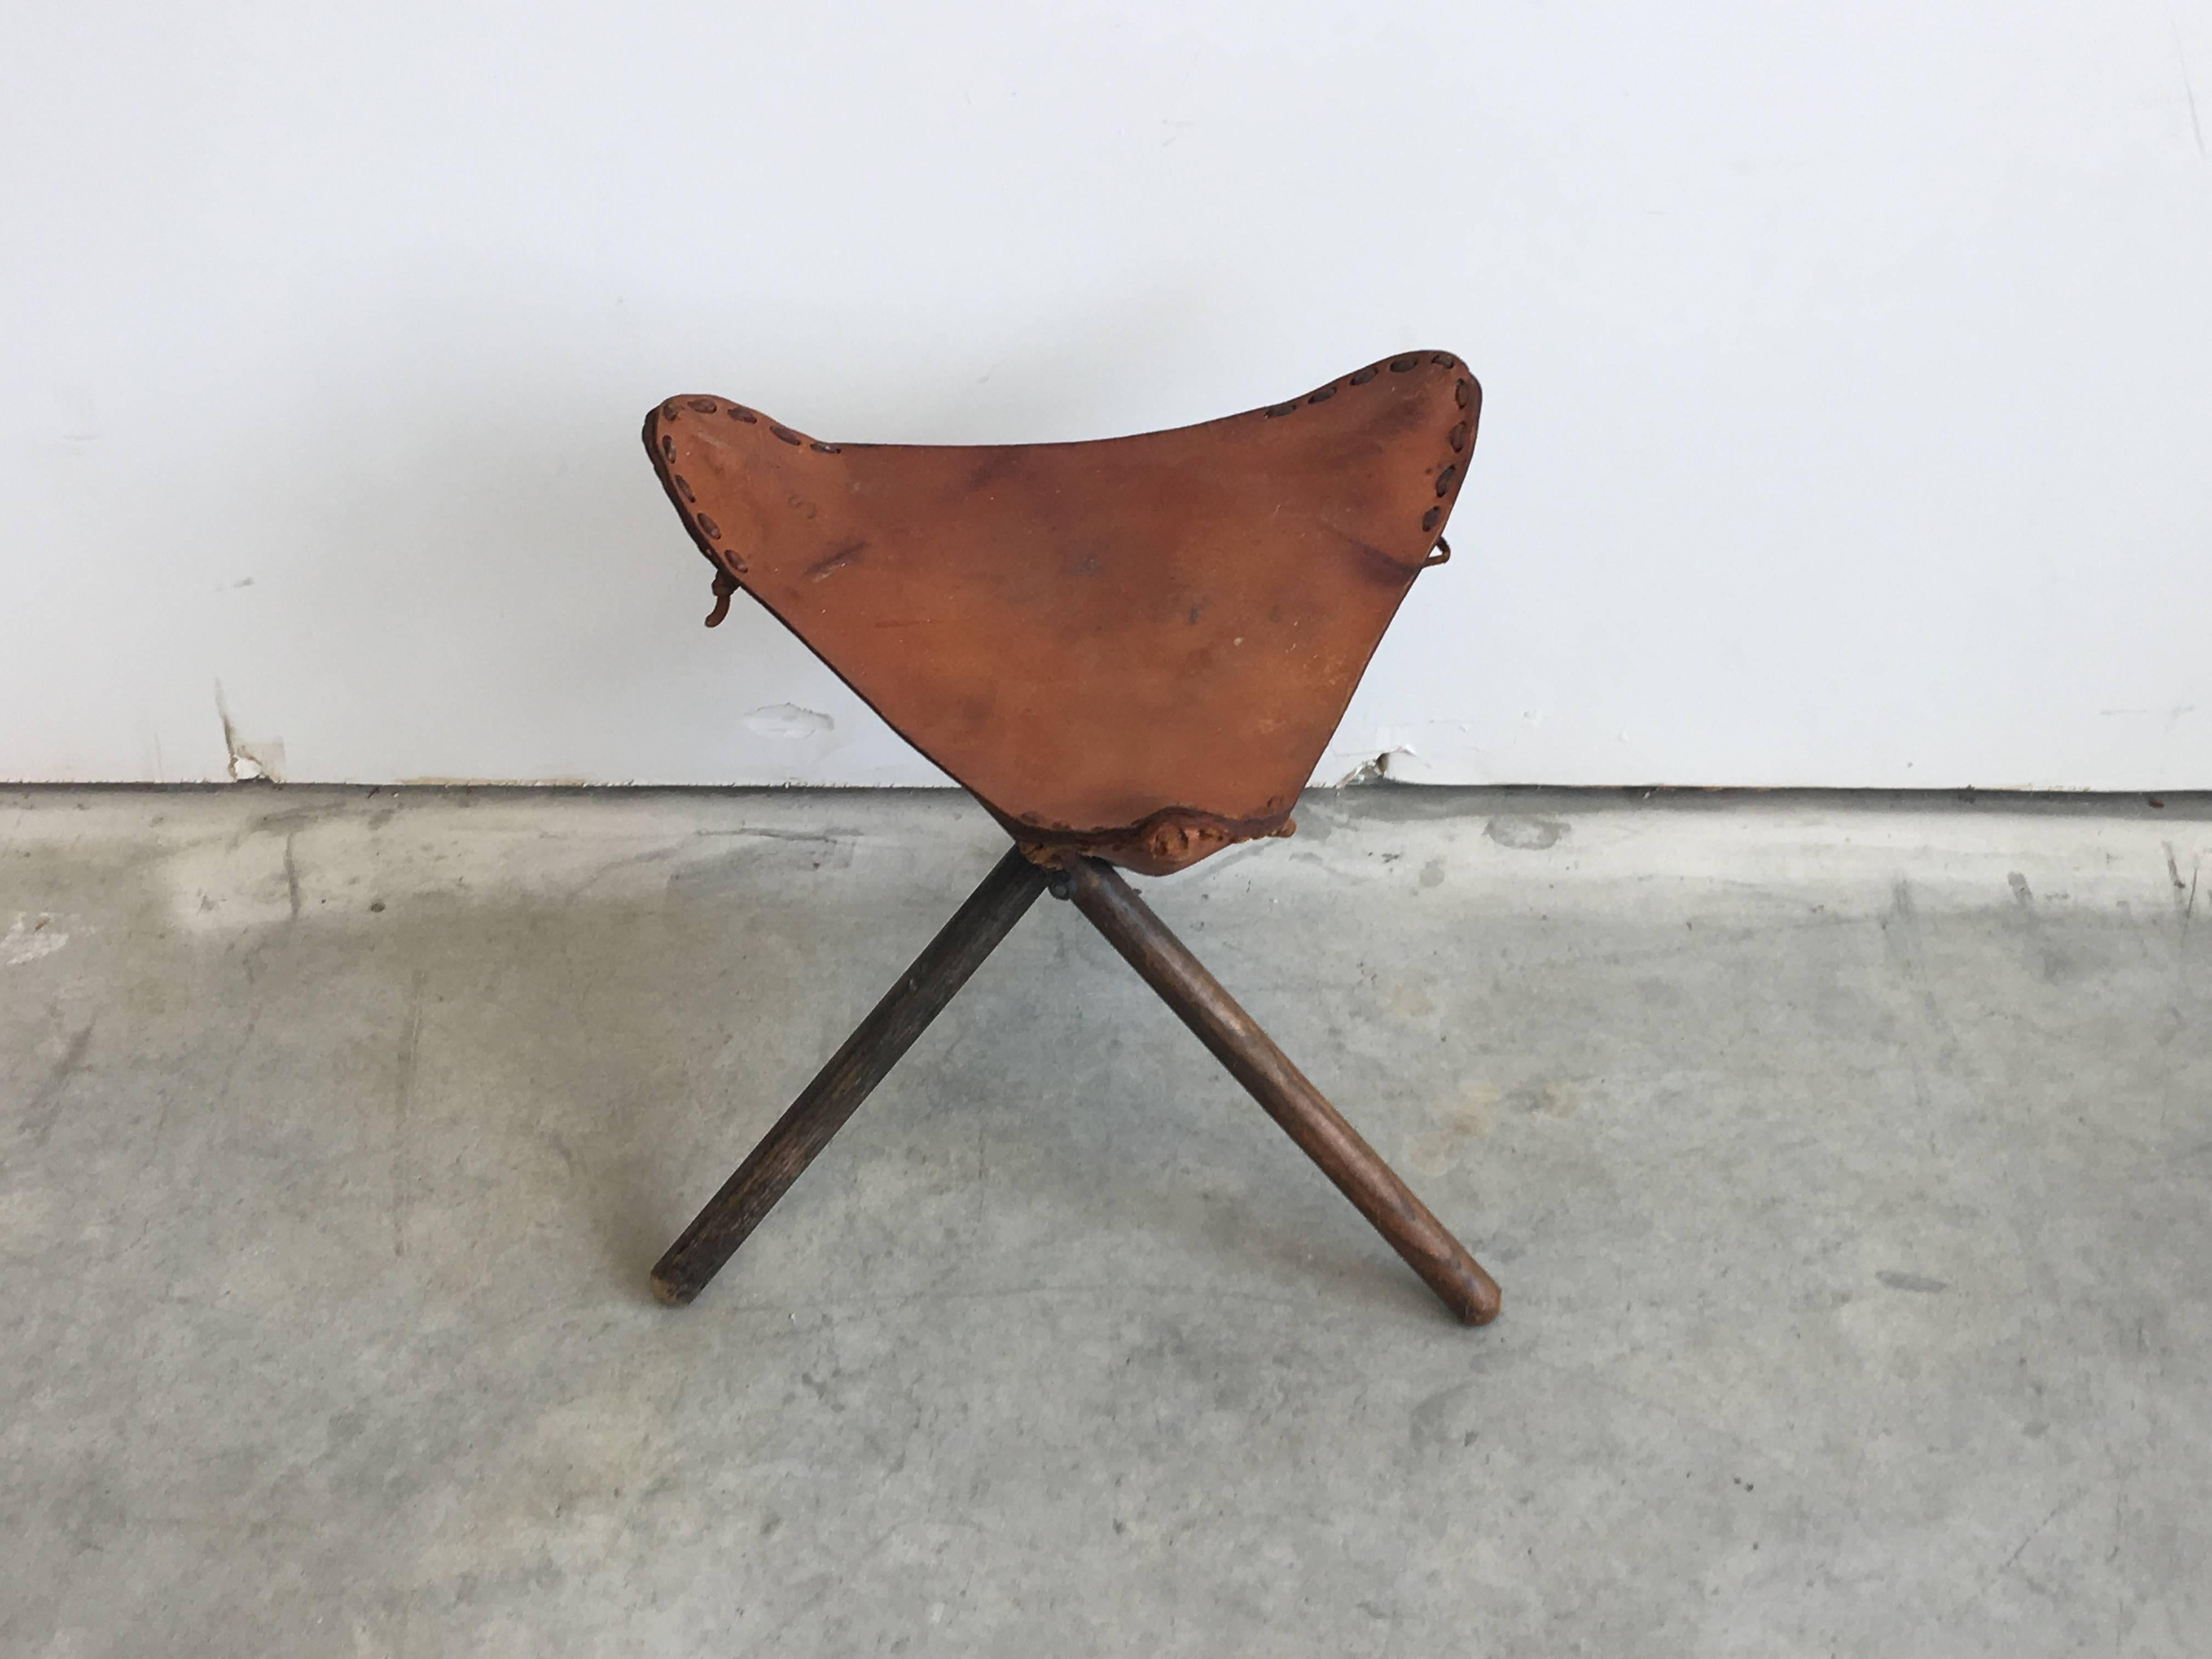 Offered is a beautiful, 1940s vegetable tanned leather tripod hunting stool.